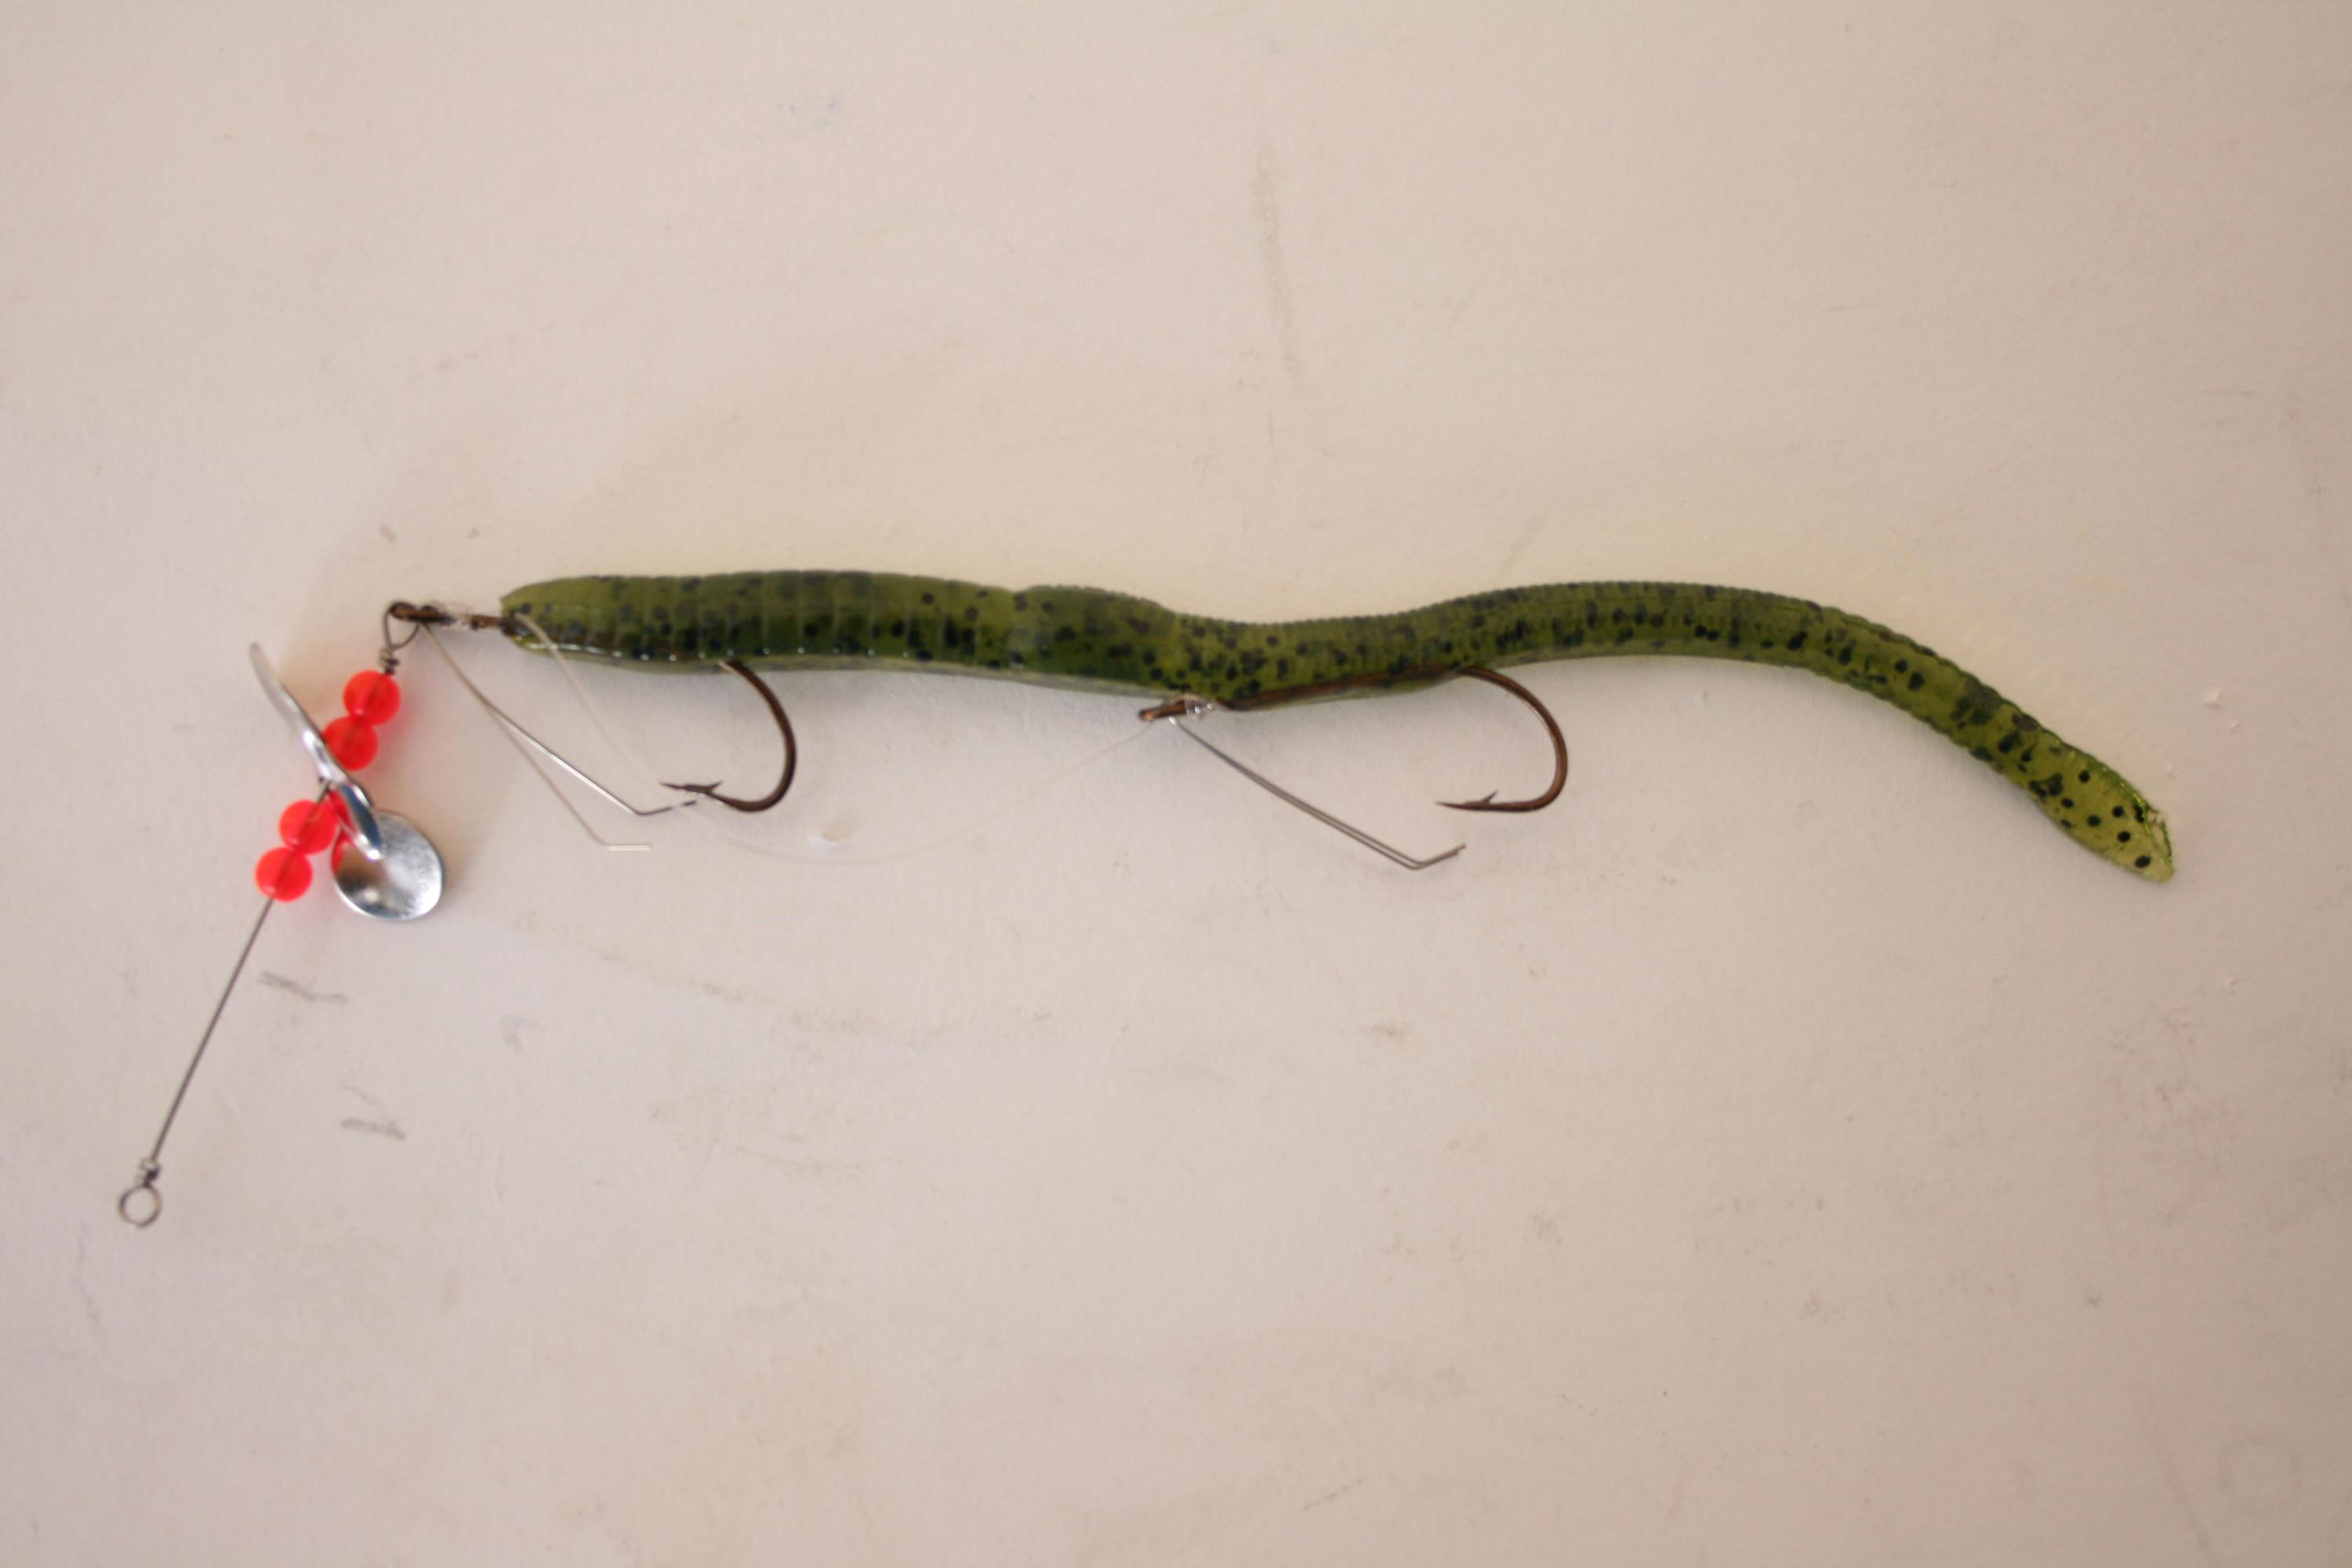 Creme Scoundrel 6-Inch Worm Bait with Wire Leader and Propeller